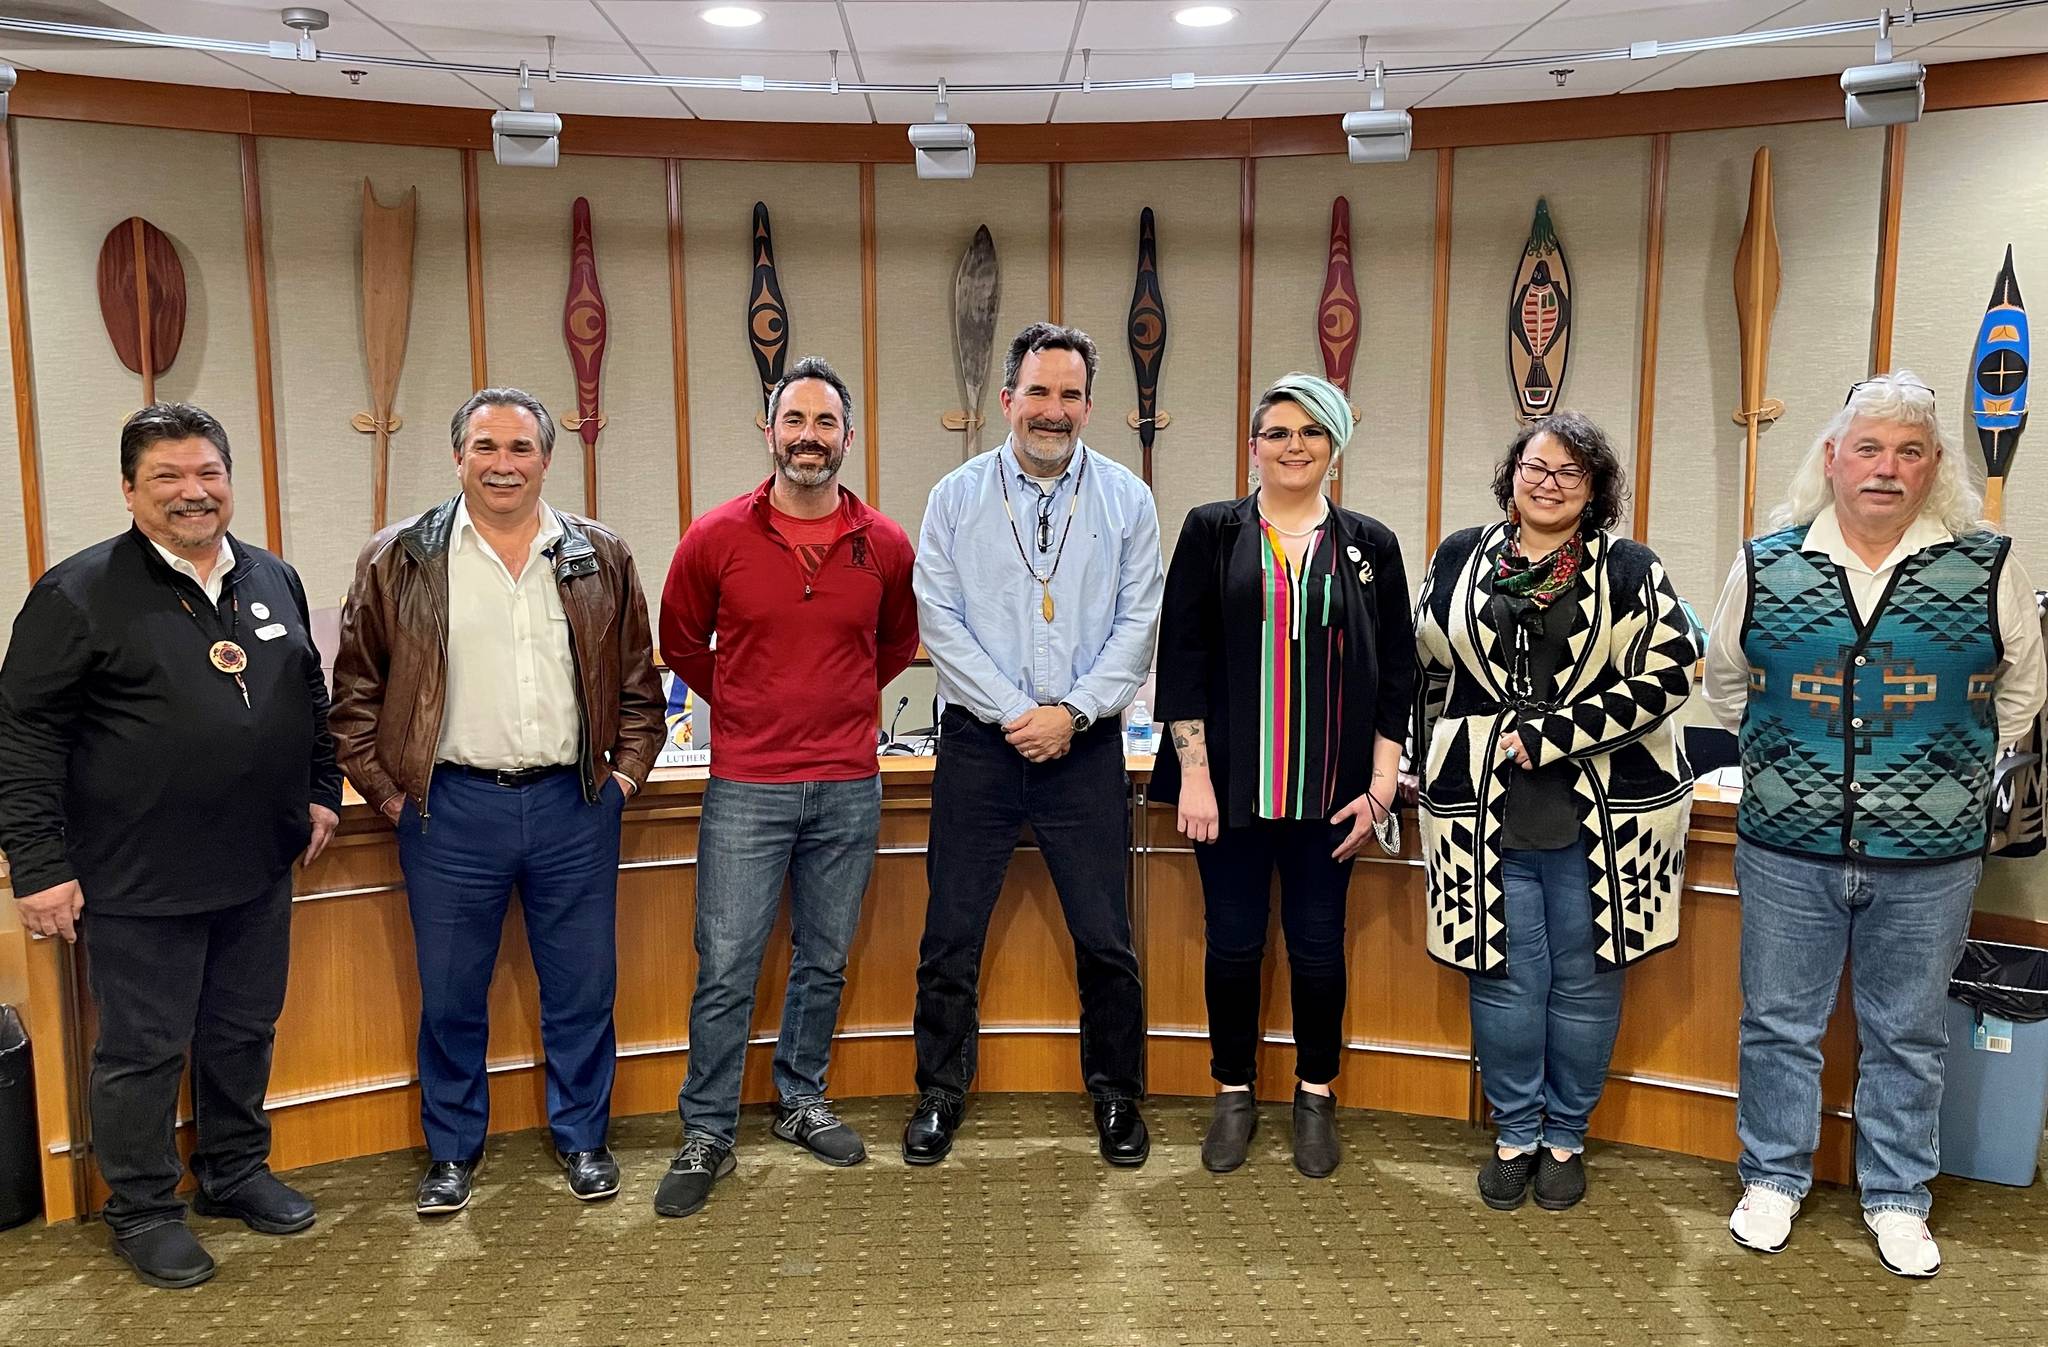 The new Suquamish Tribal Council, from left, Councilmembers Luther (Jay) Mills Jr., Rich Purser, Sammy Mabe, Chairman Leonard Forsman, secretary Windy Anderson, treasurer Robin Little Wing Sigo and vice-chairman Wayne George. (Photo by Jon Anderson/Courtesy of Suquamish Tribe)